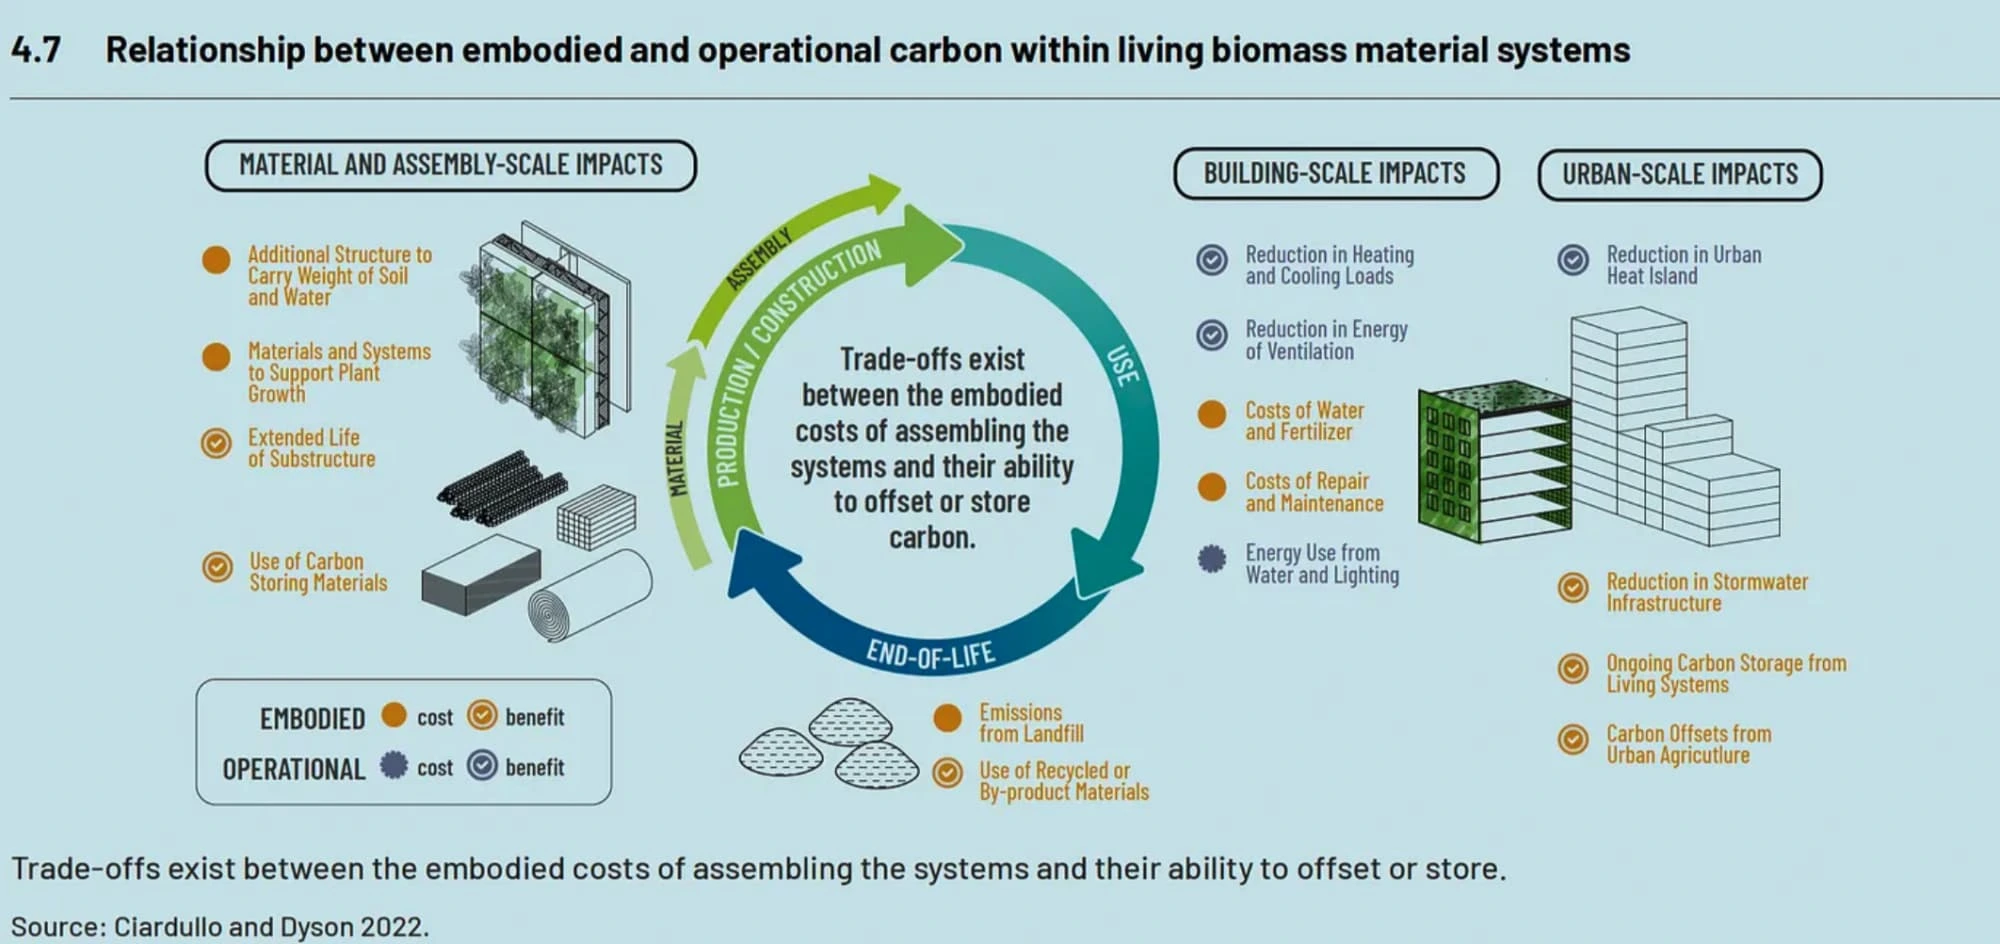 Image from the UNEP Materials Report showcasing sustainability initiatives